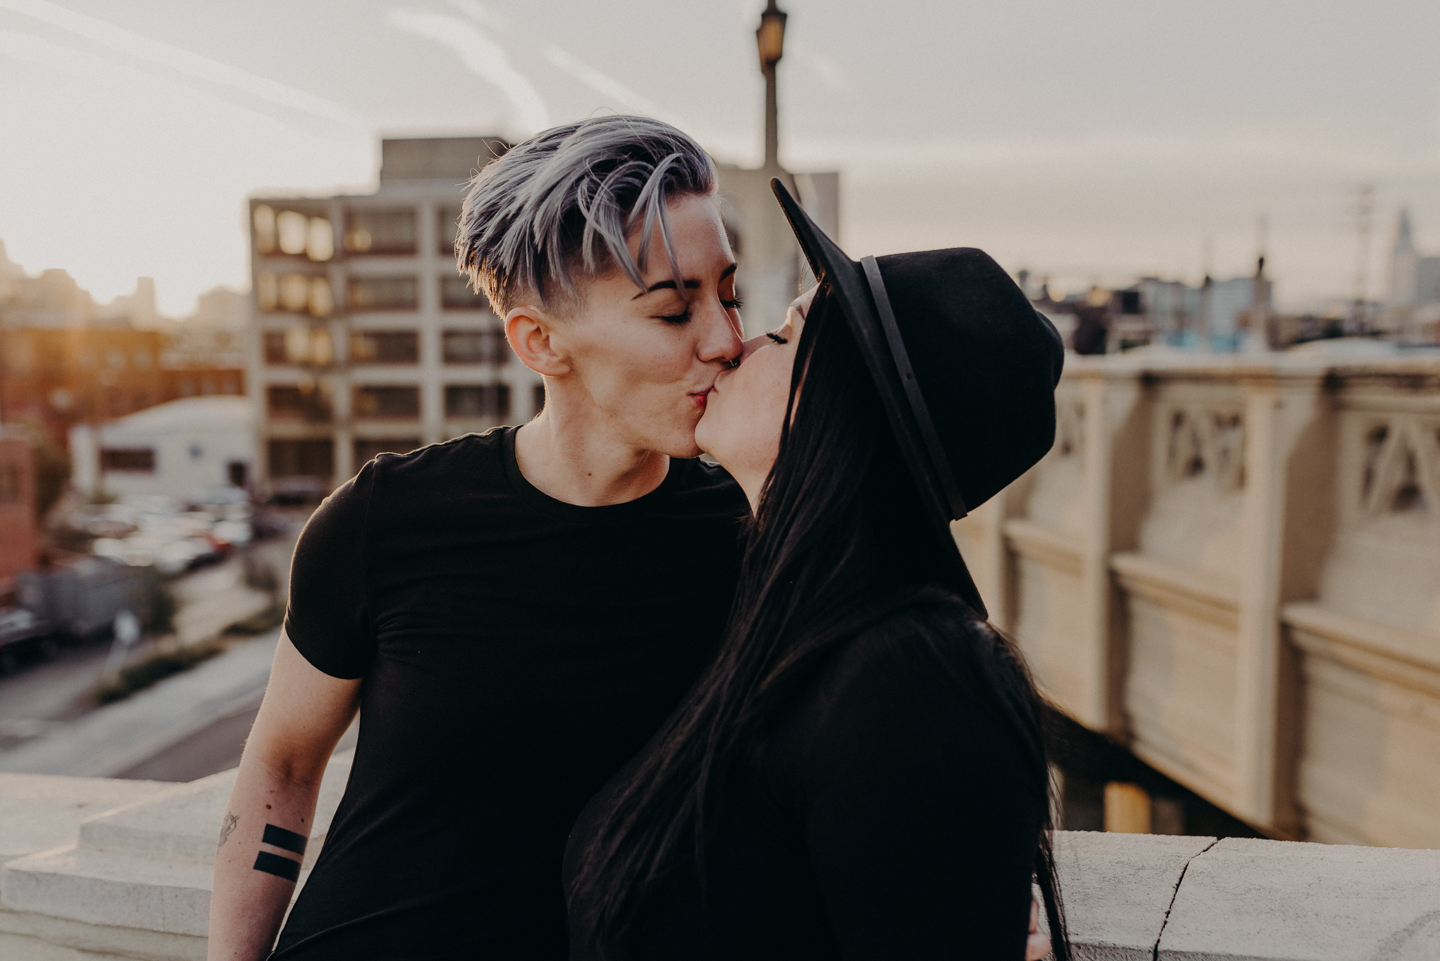 queer wedding photographer in los angeles - lesbian engagement session los angeles - isaiahandtaylor.com-027.jpg